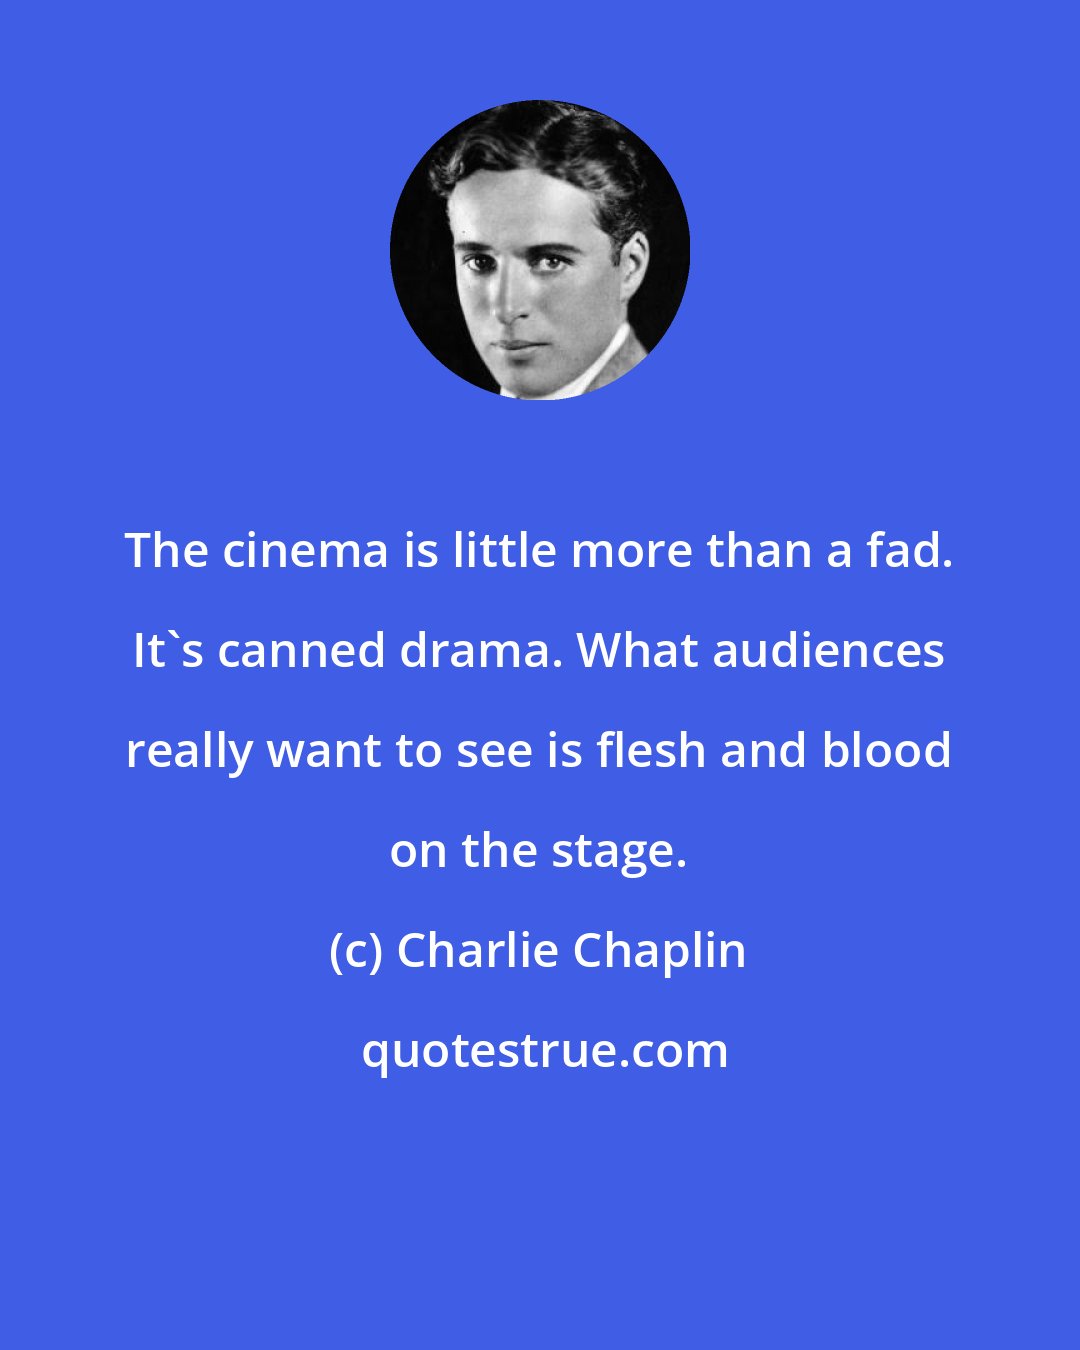 Charlie Chaplin: The cinema is little more than a fad. It's canned drama. What audiences really want to see is flesh and blood on the stage.